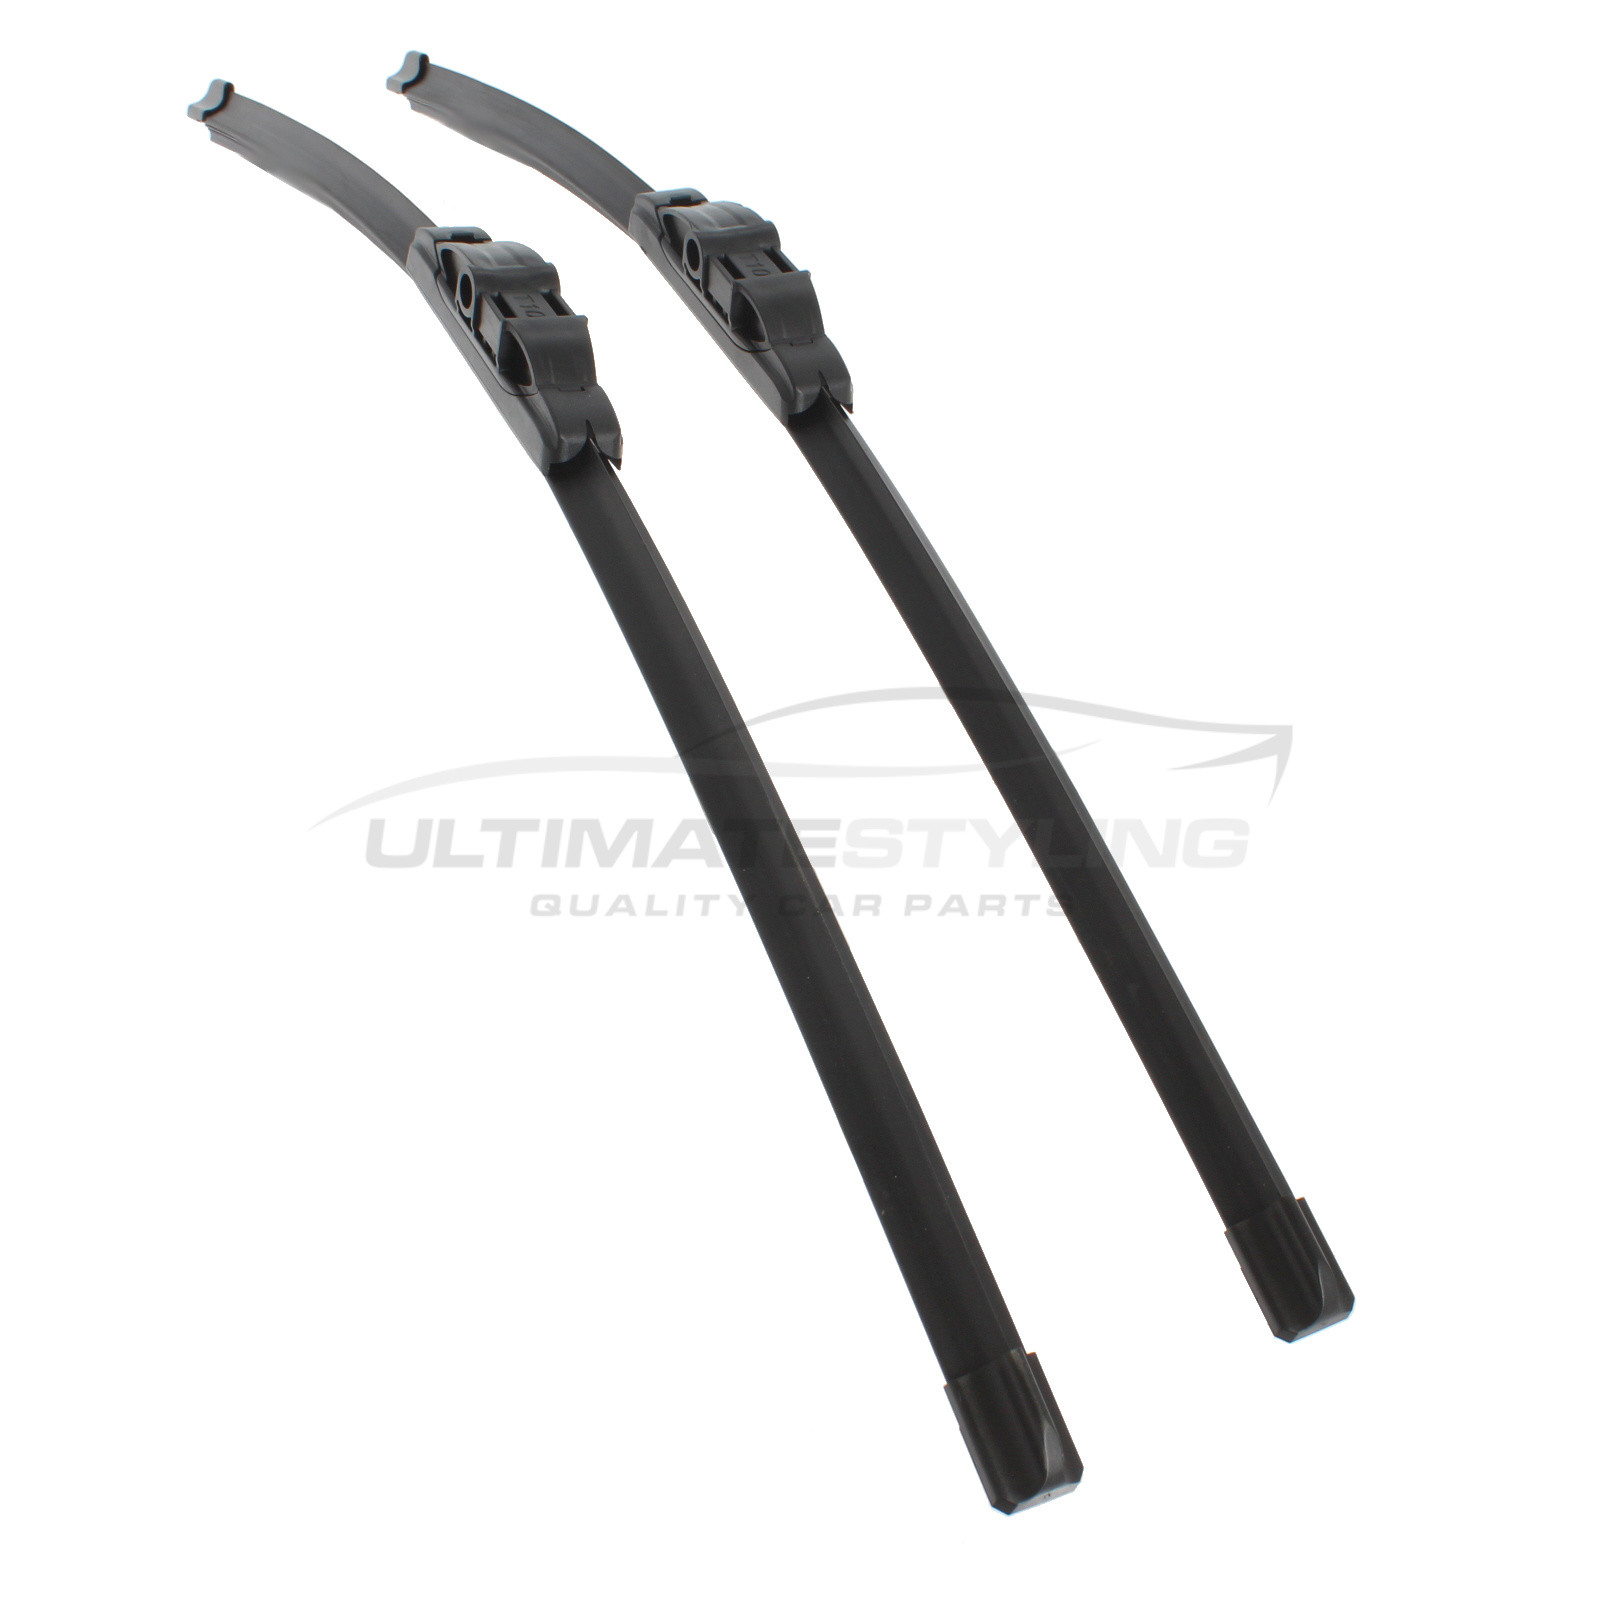 Drivers Side & Passenger Side (Front) Wiper Blades for Mercedes Benz CLS Class